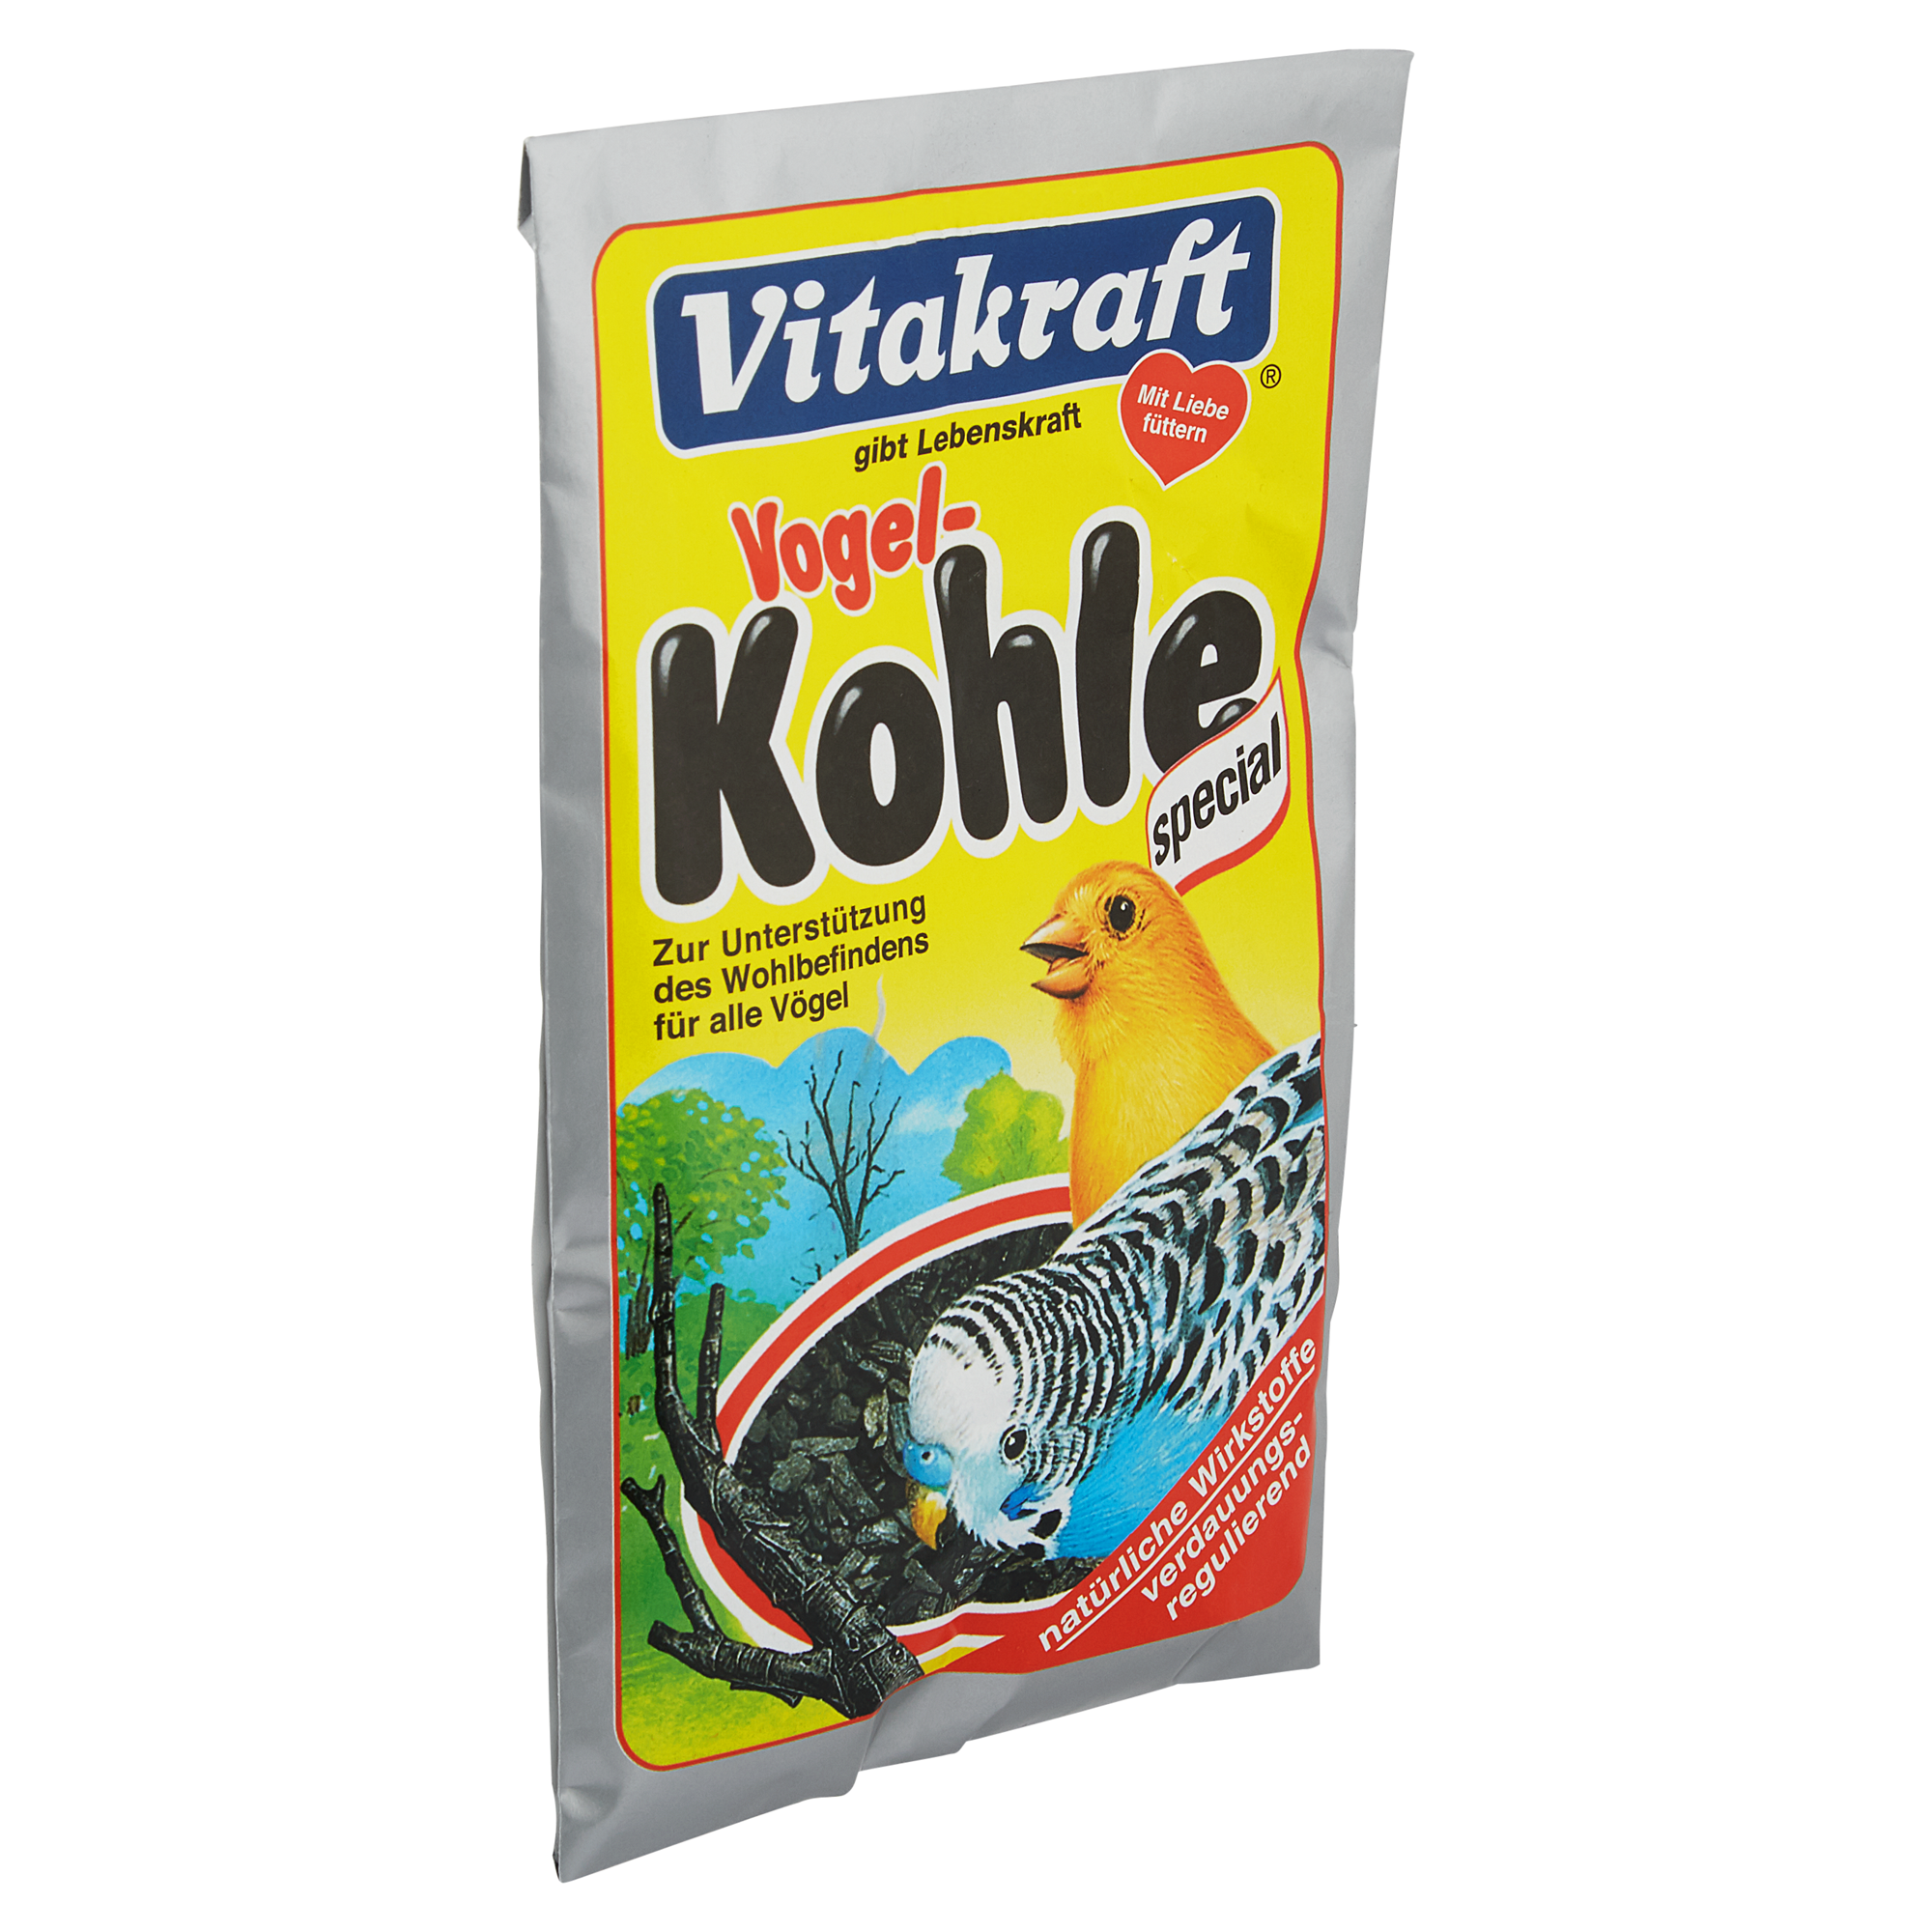 Vogelkohle 10 g + product picture